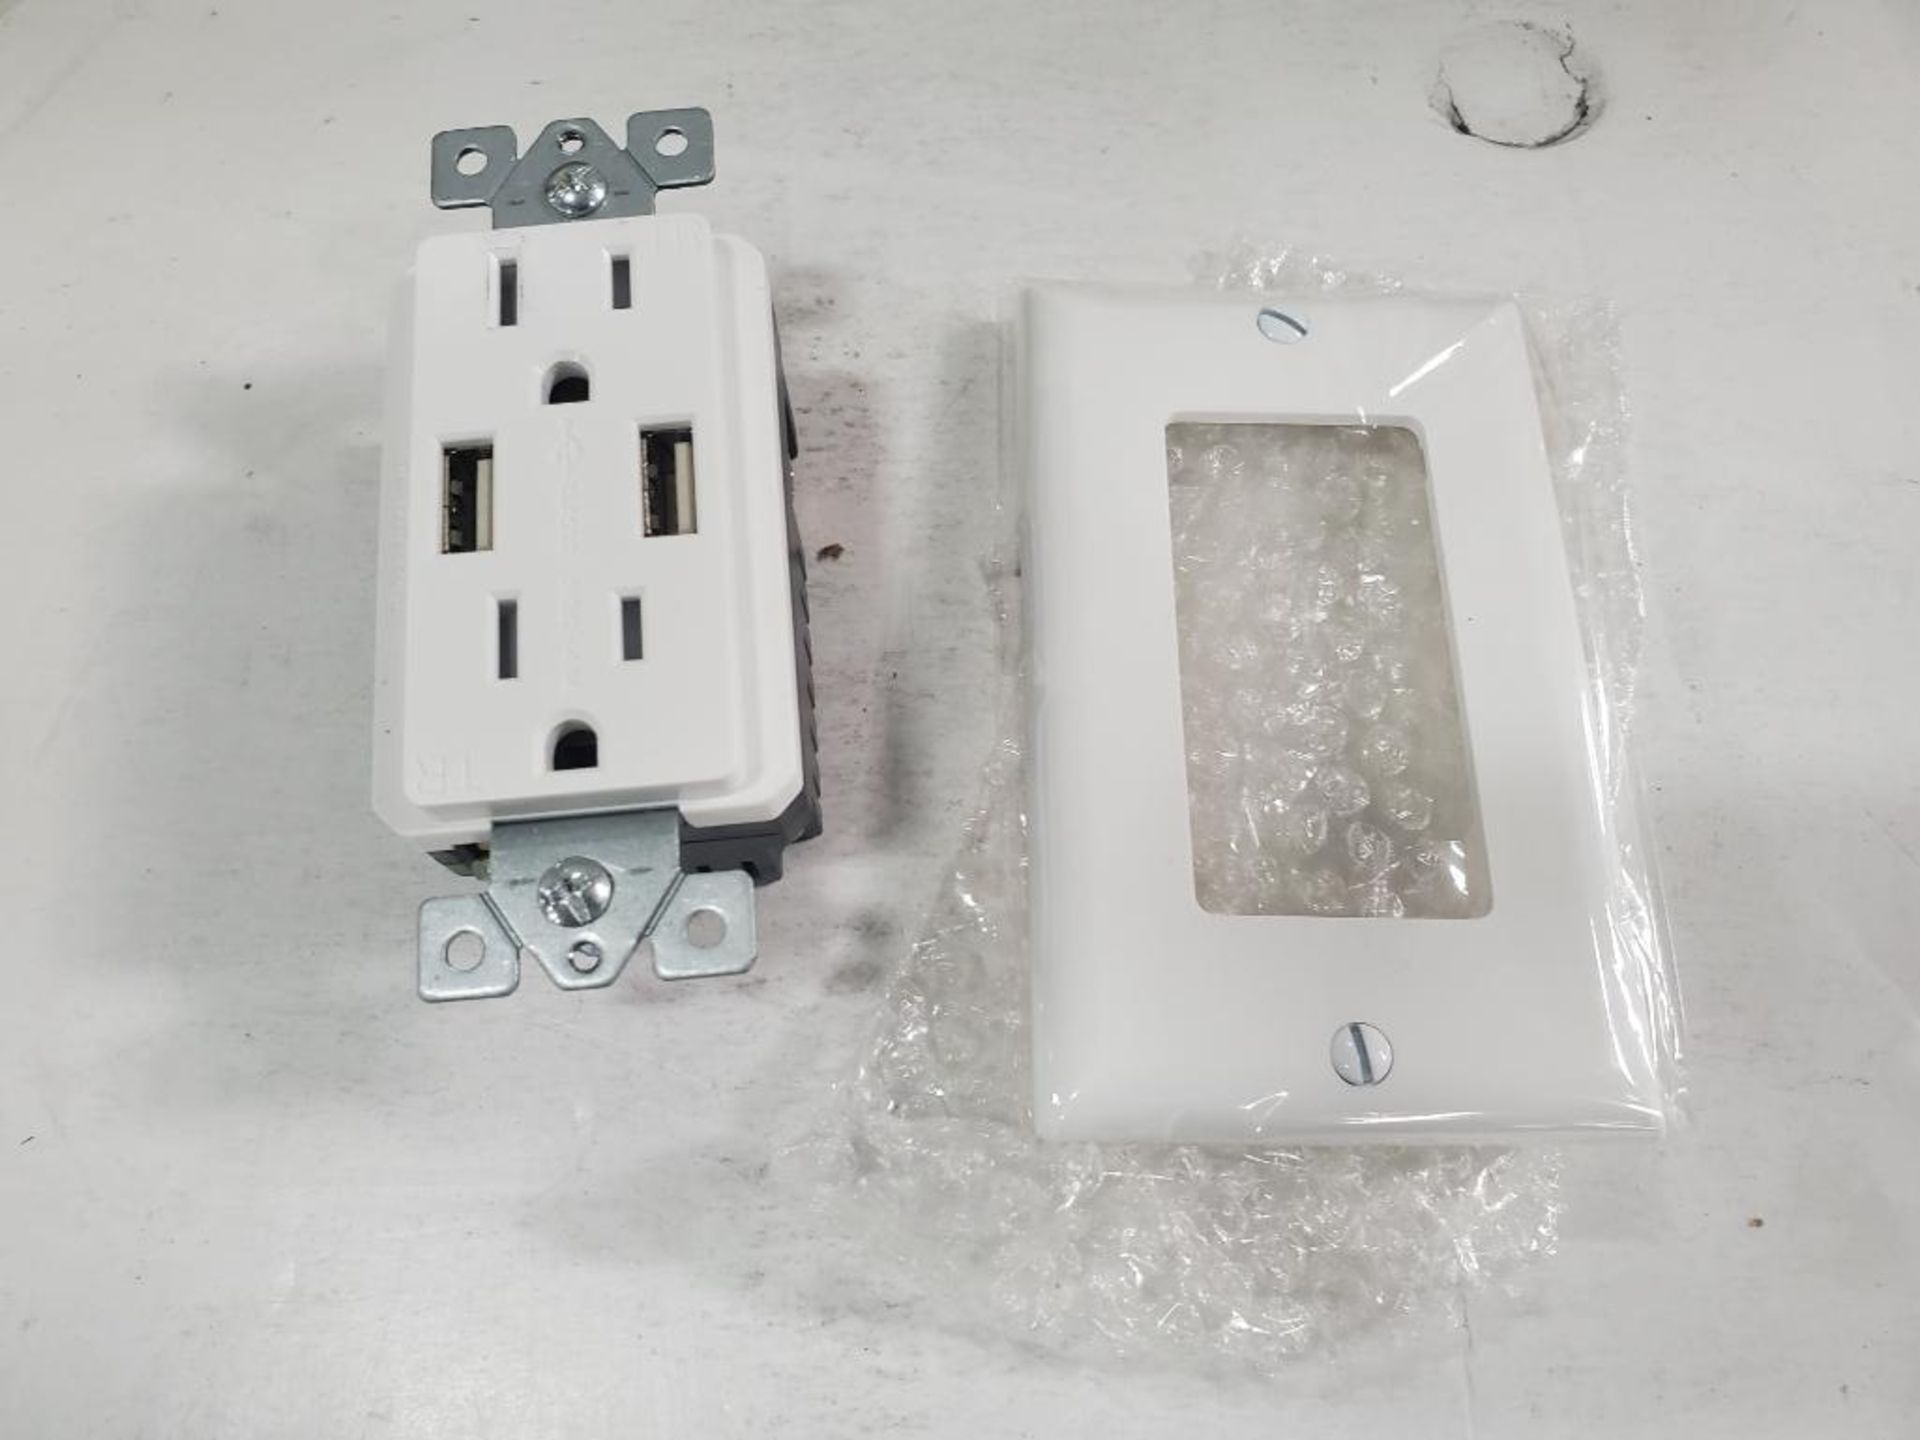 Qty 120 - Magnadyne WC-501W USB / dual AC wall mount outlet. New in box.